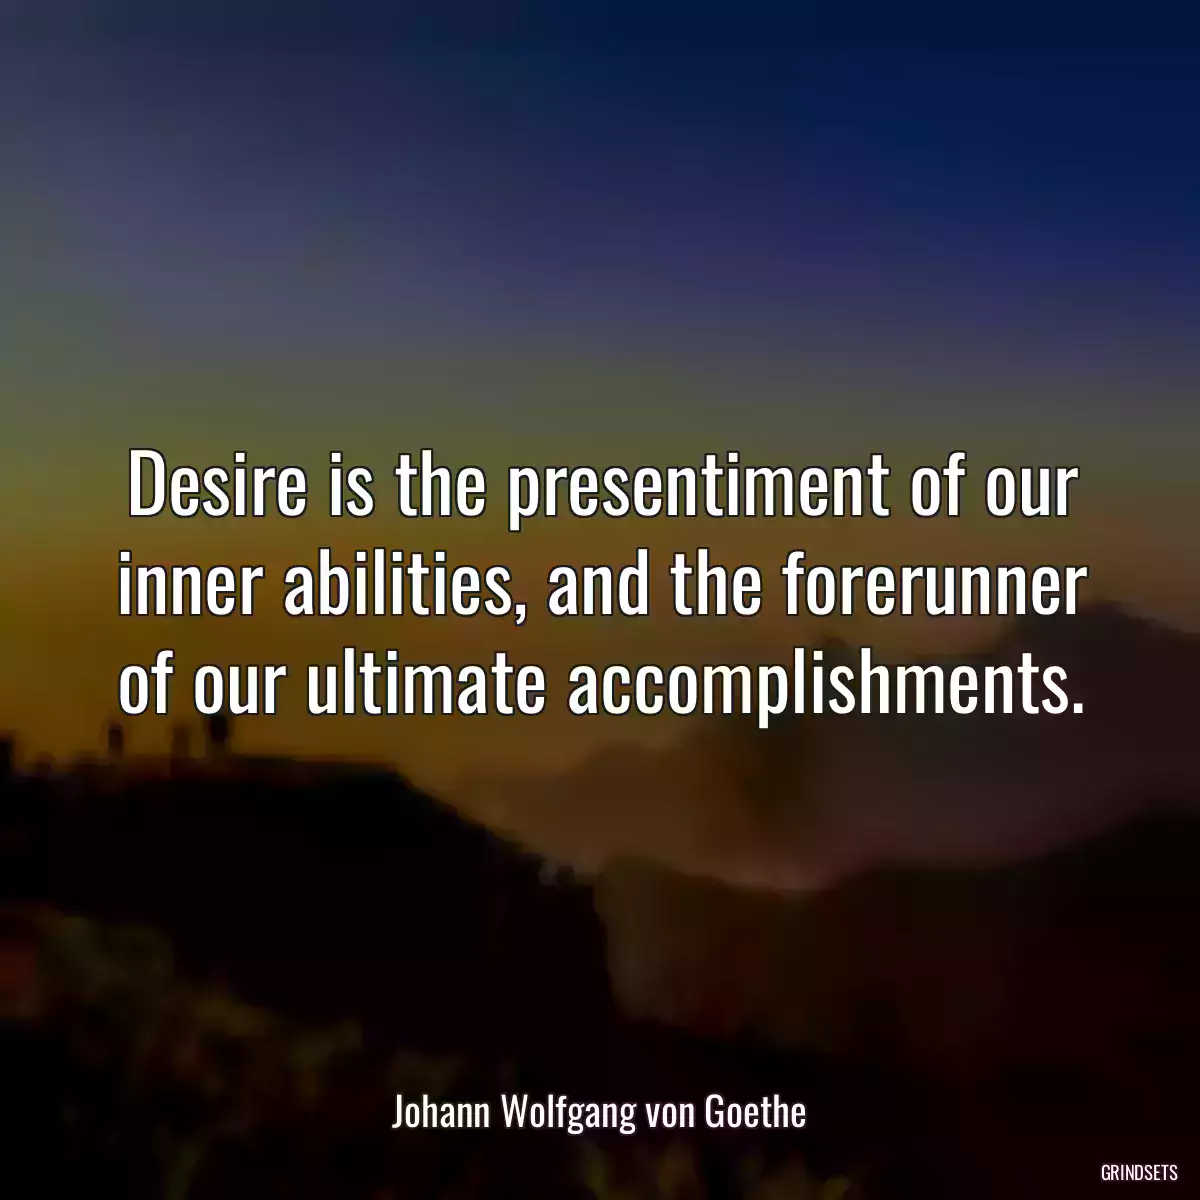 Desire is the presentiment of our inner abilities, and the forerunner of our ultimate accomplishments.